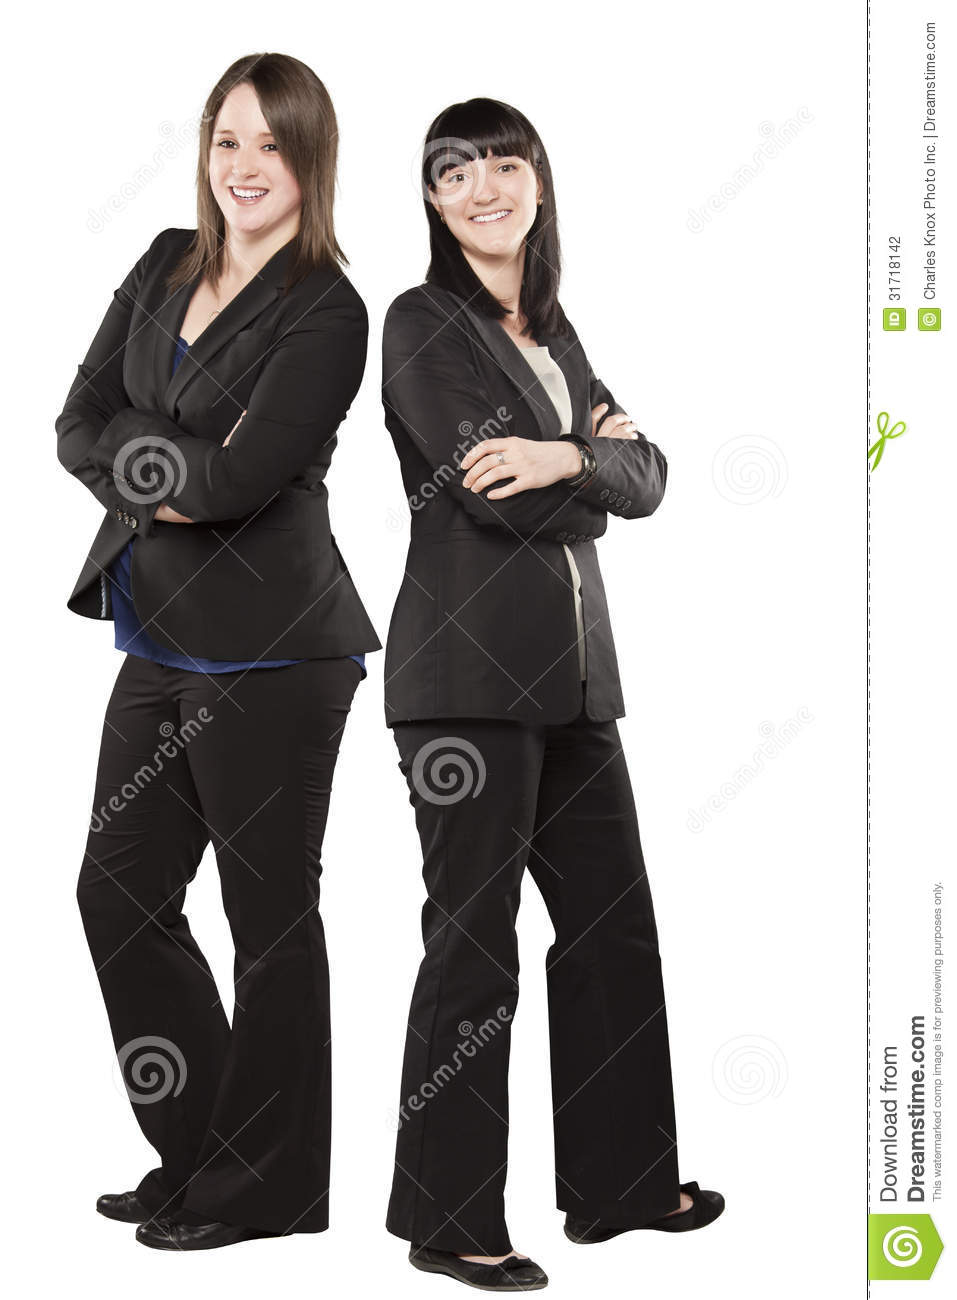 Young Women In Professional Attire Stock Photography   Image  31718142